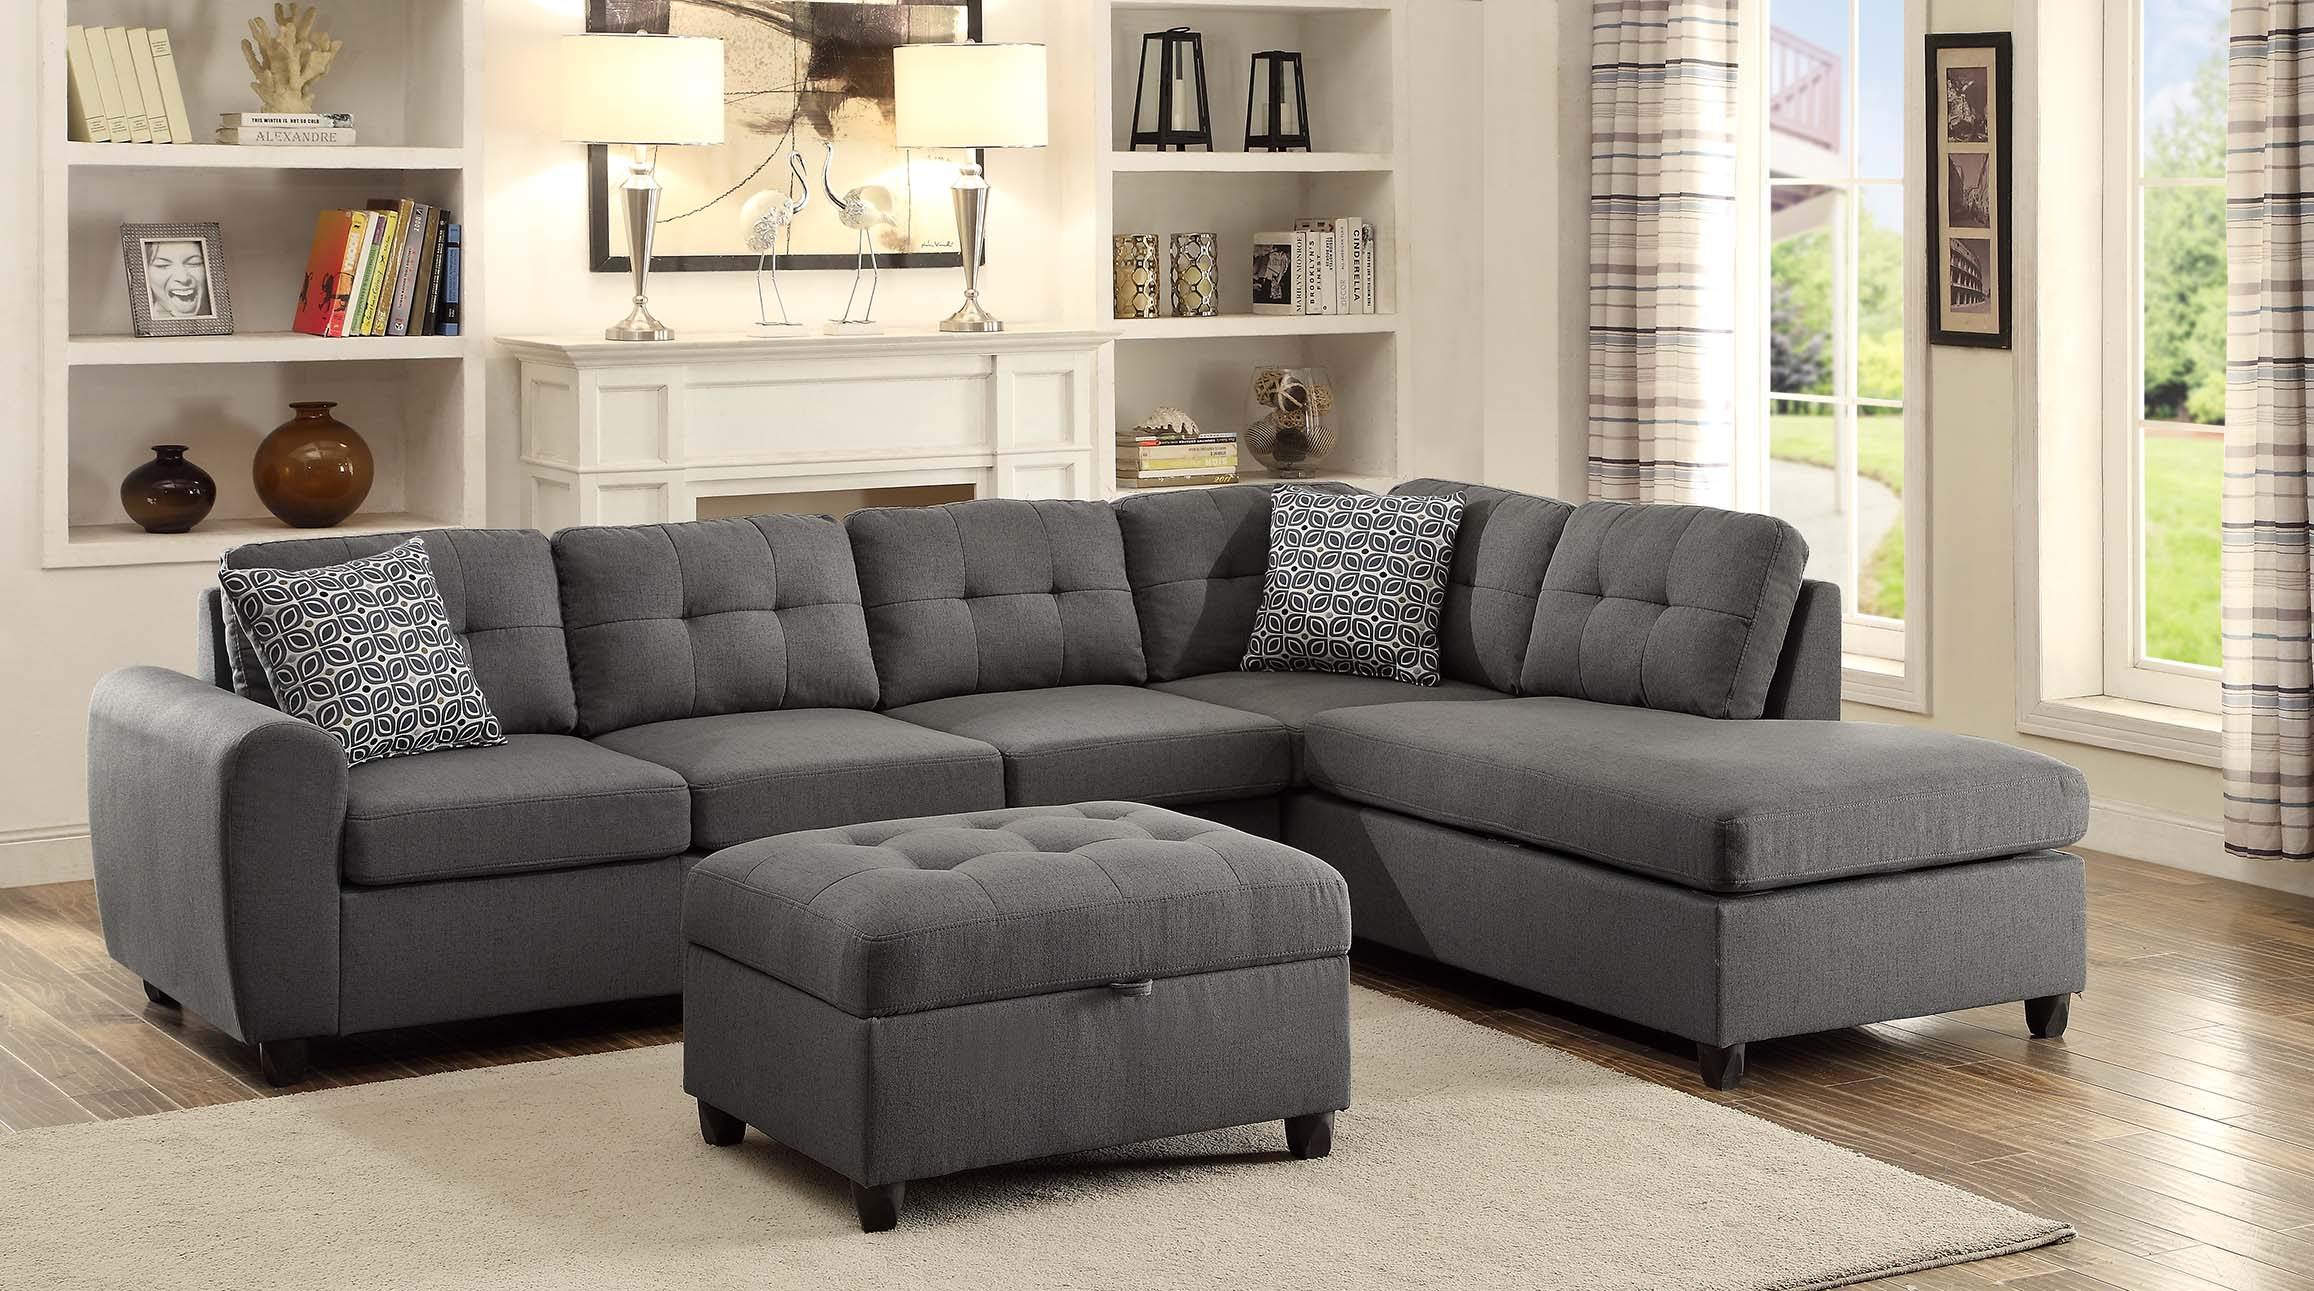 Stonenesse sectional 500413 Sectional1 By coaster - sofafair.com